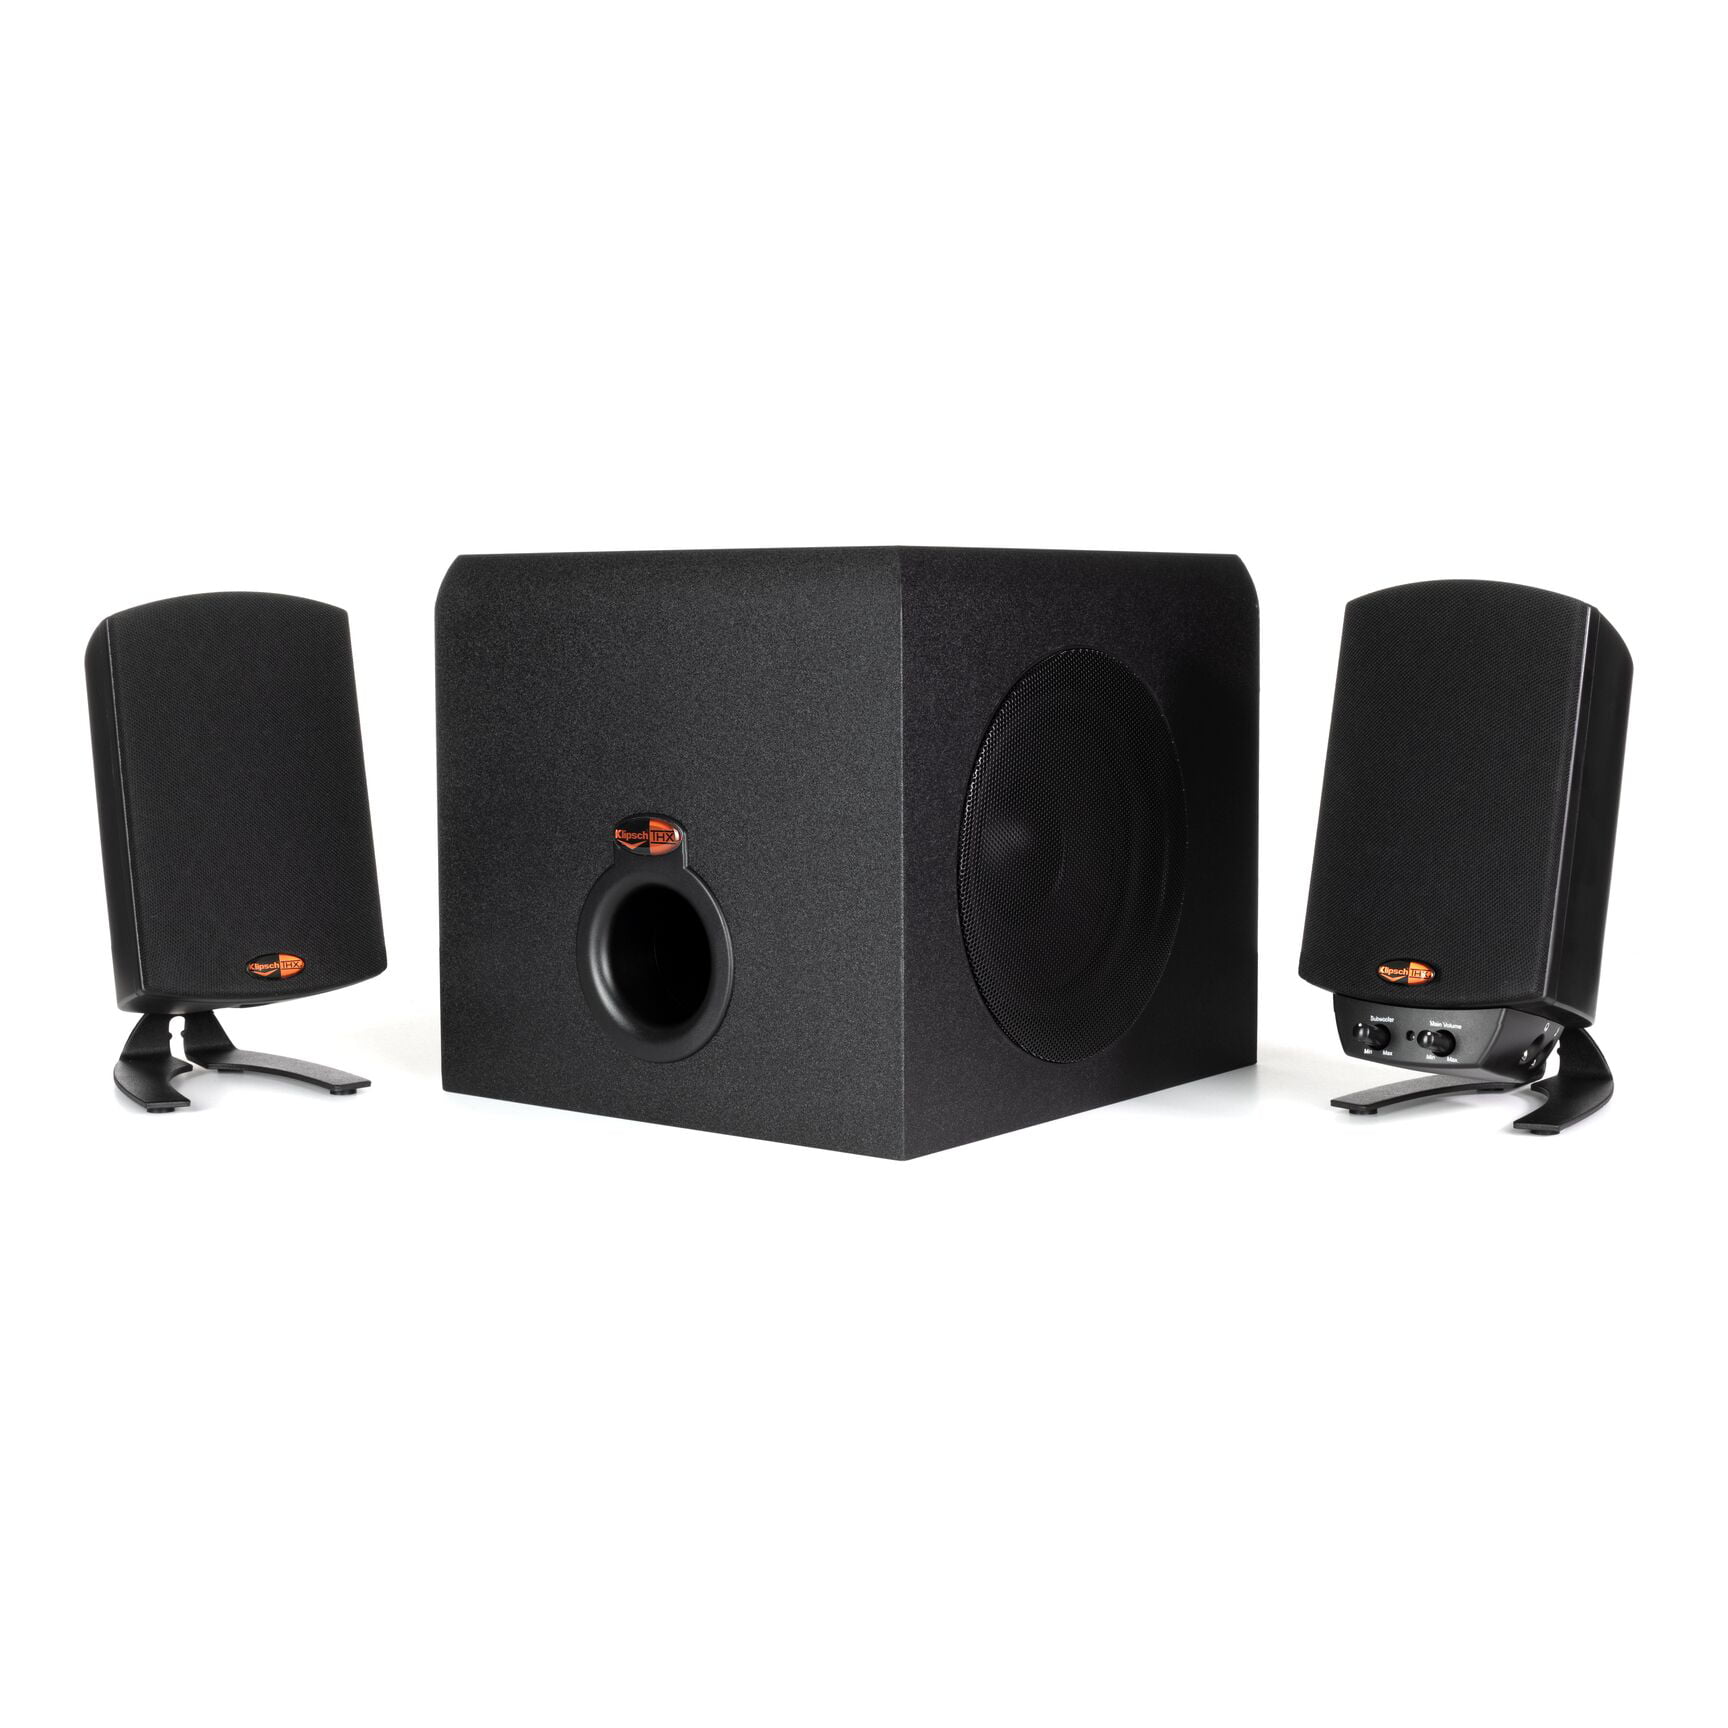 3-Pc Klipsch Pro Media 2.1 THX Computer Speakers Two-Way Satellites 3" Midbass Drivers & 6.5" Subwoofer $60 + Free Shipping